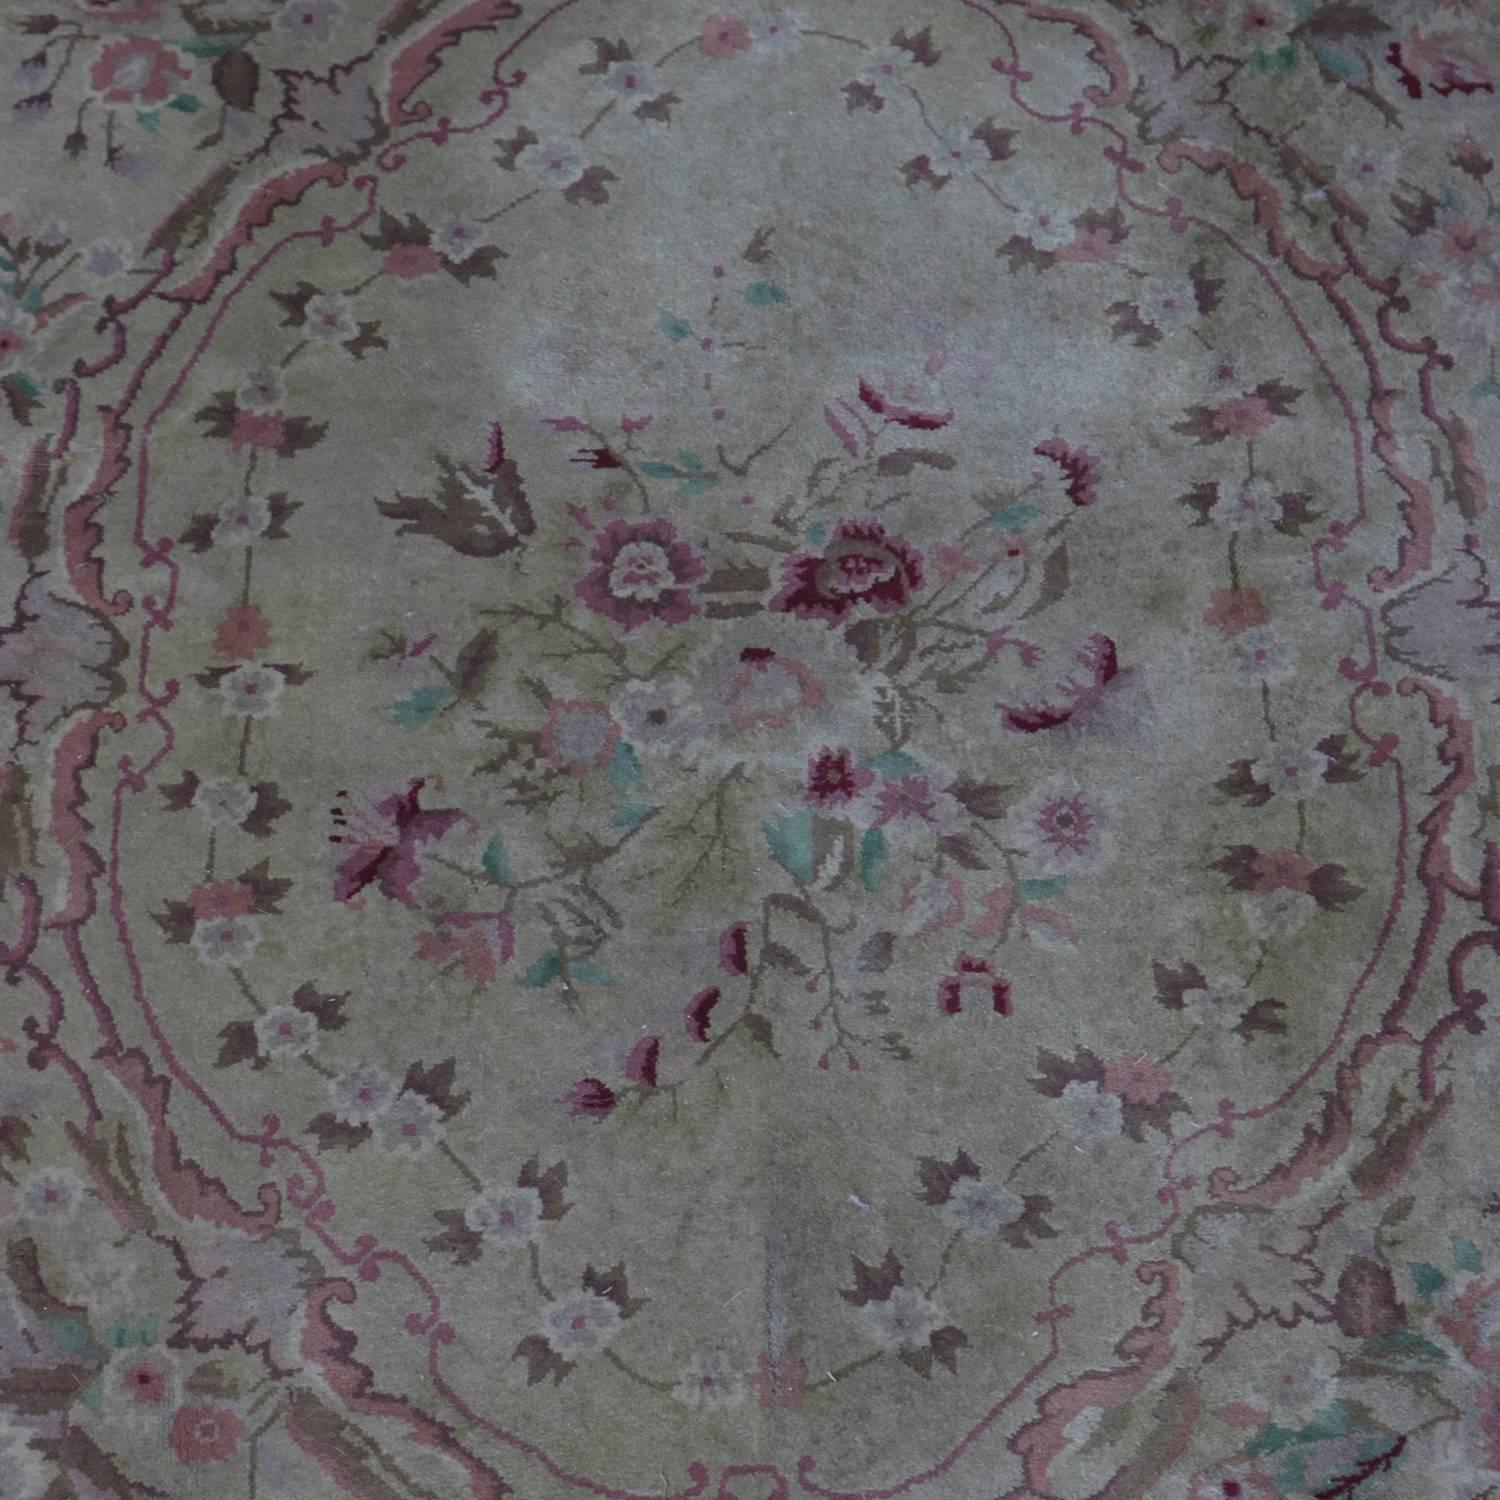 French Aubusson style wool rug features centre medallion with foliate, scroll and floral motif, 20th century

***DELIVERY NOTICE – Due to COVID-19 we are employing NO-CONTACT PRACTICES in the transfer of purchased items.  Additionally, for those who